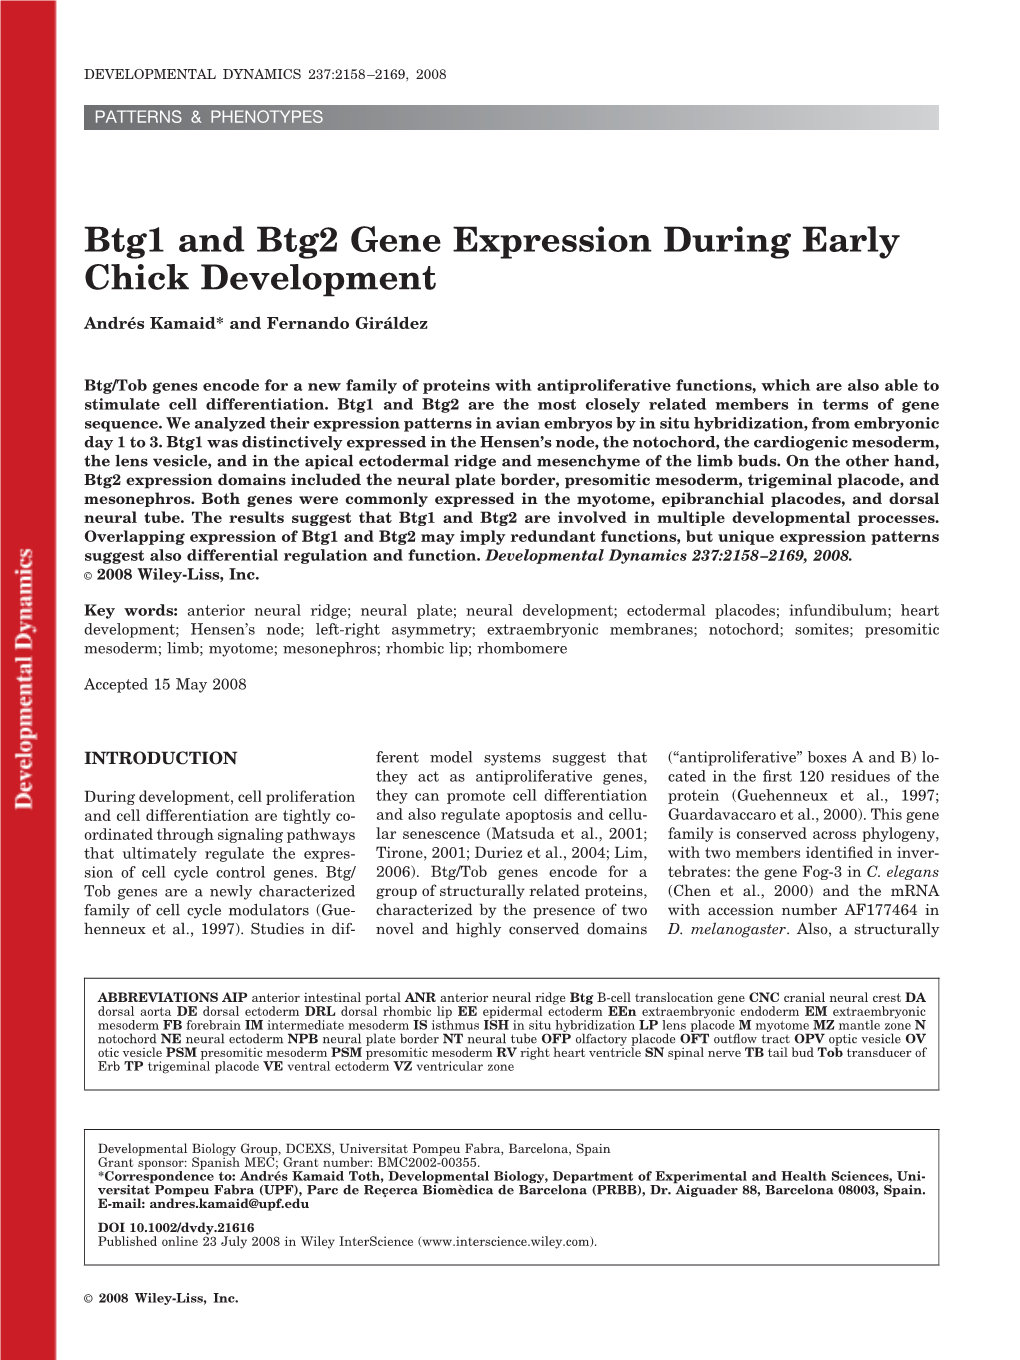 Btg1 and Btg2 Gene Expression During Early Chick Development